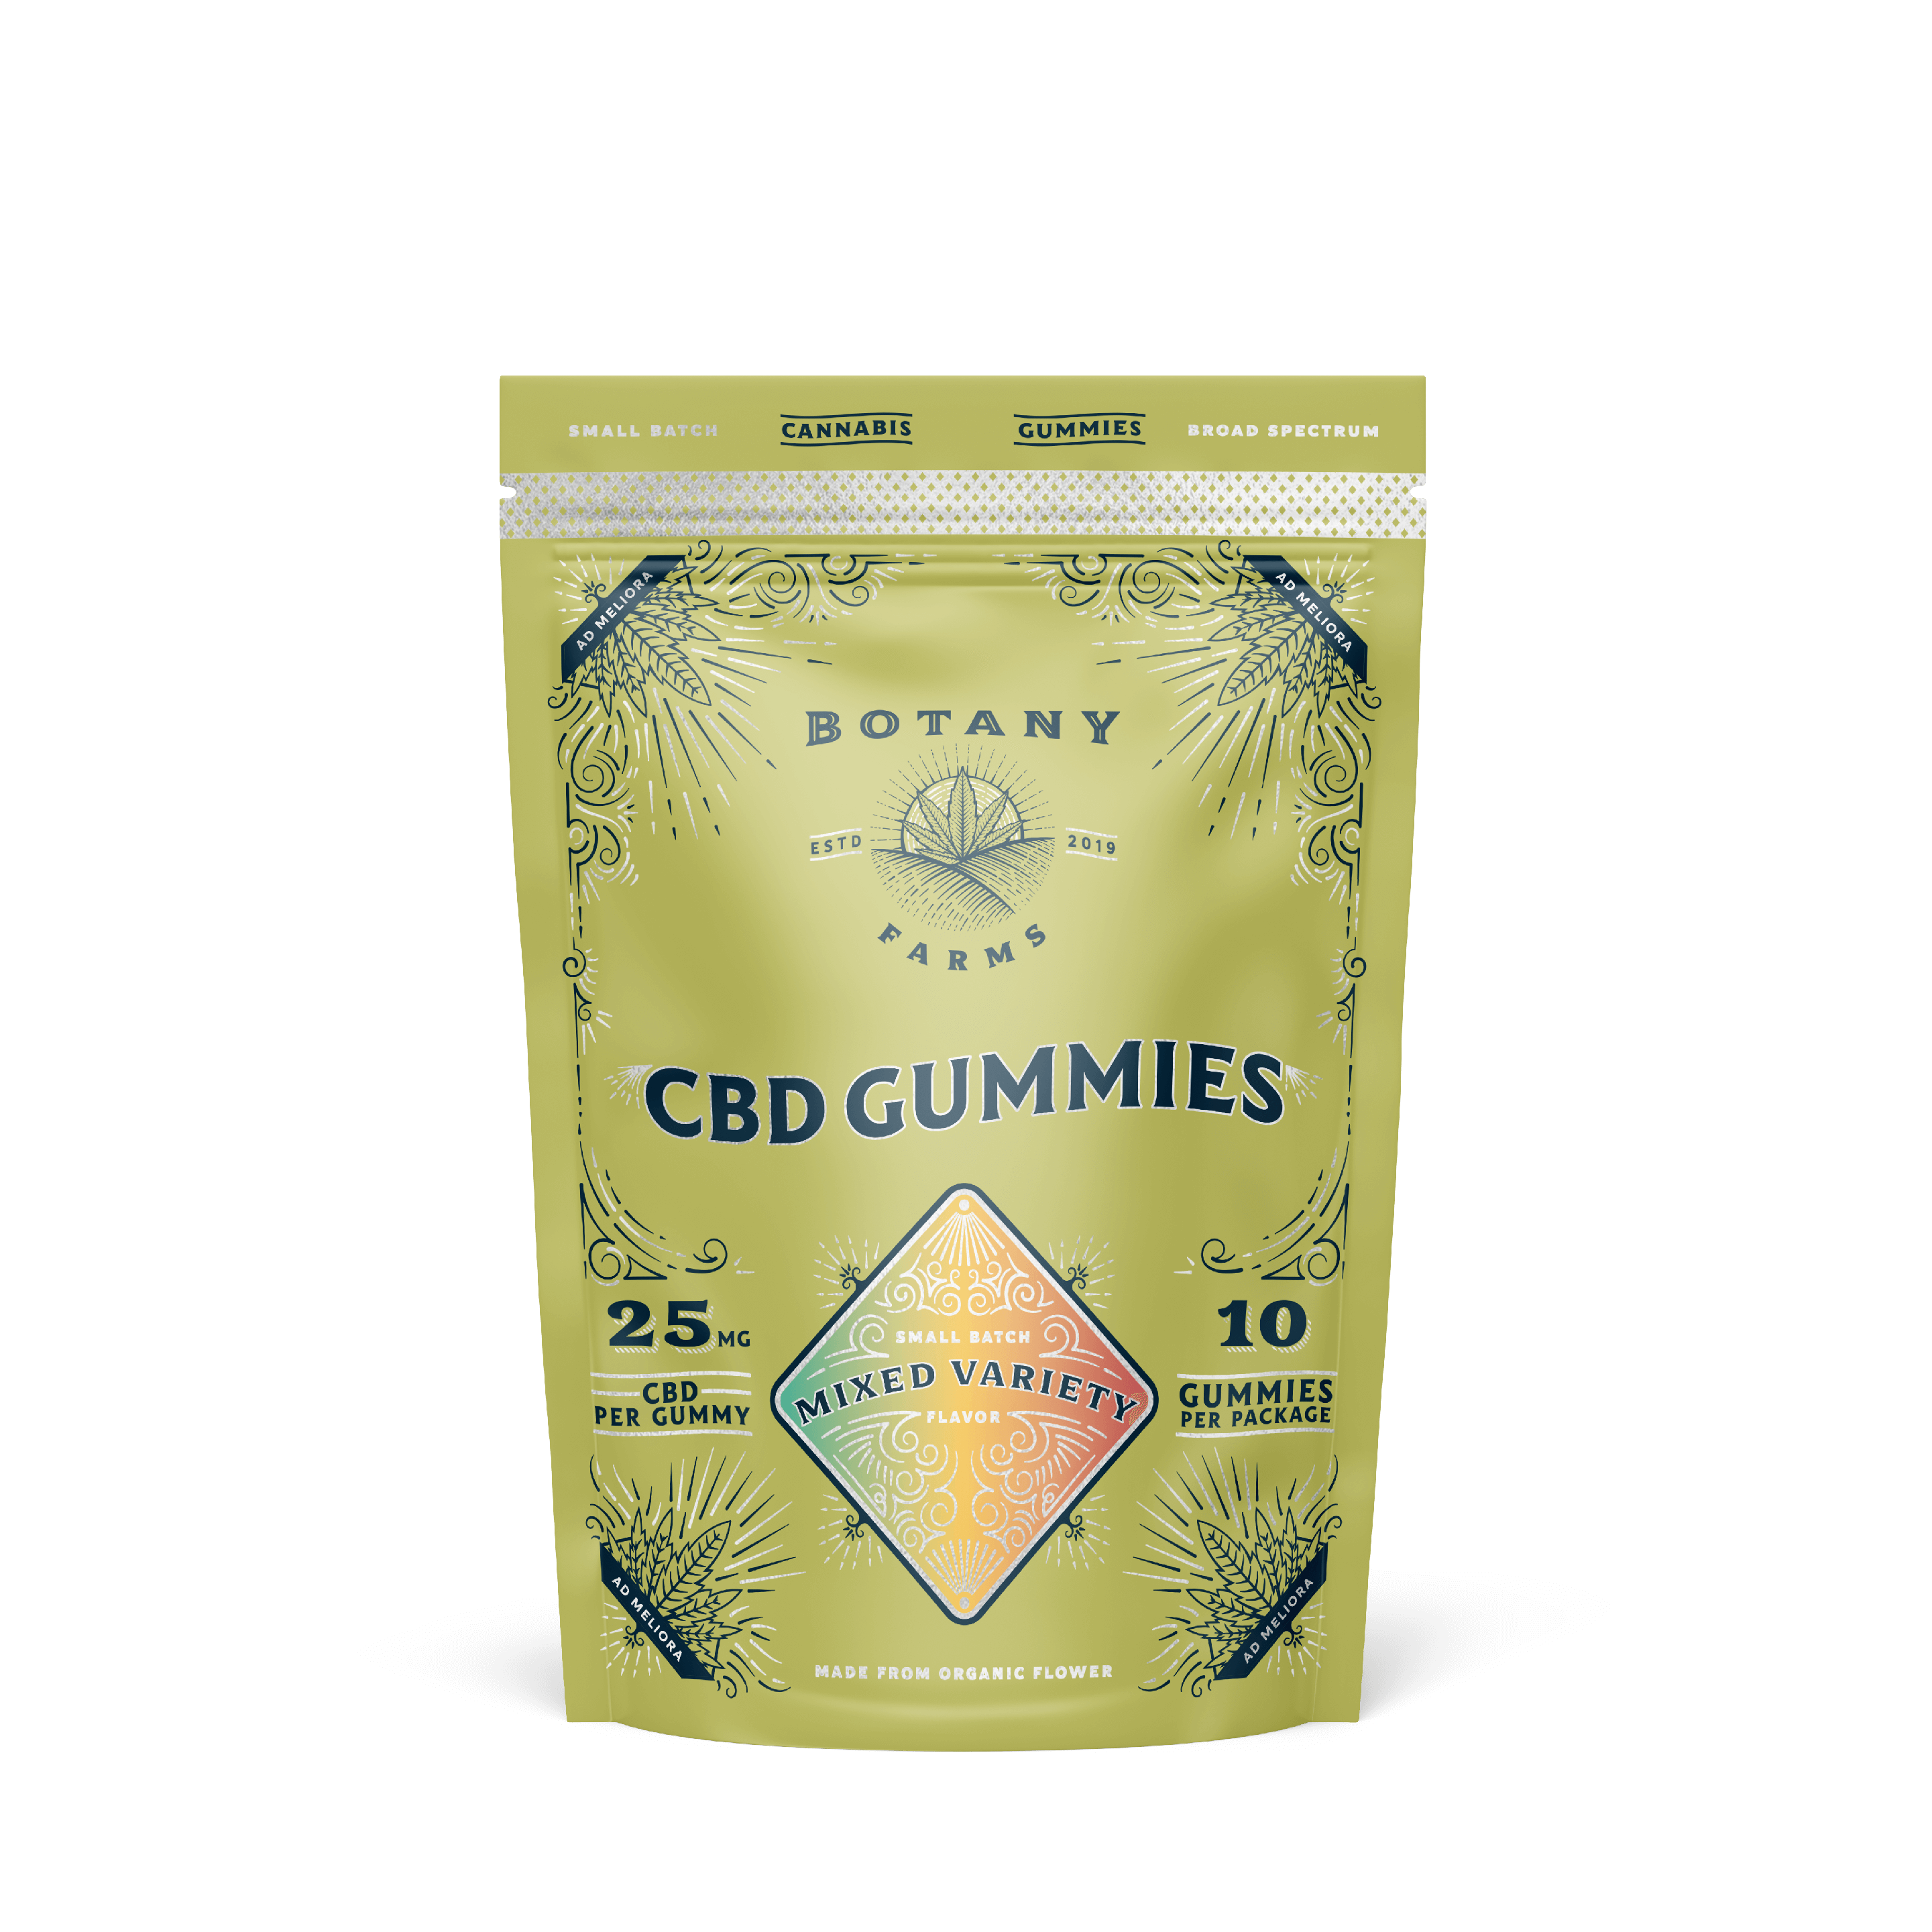 Mixed Flavors CBD Gummies: 10 Pack from Botany Farms